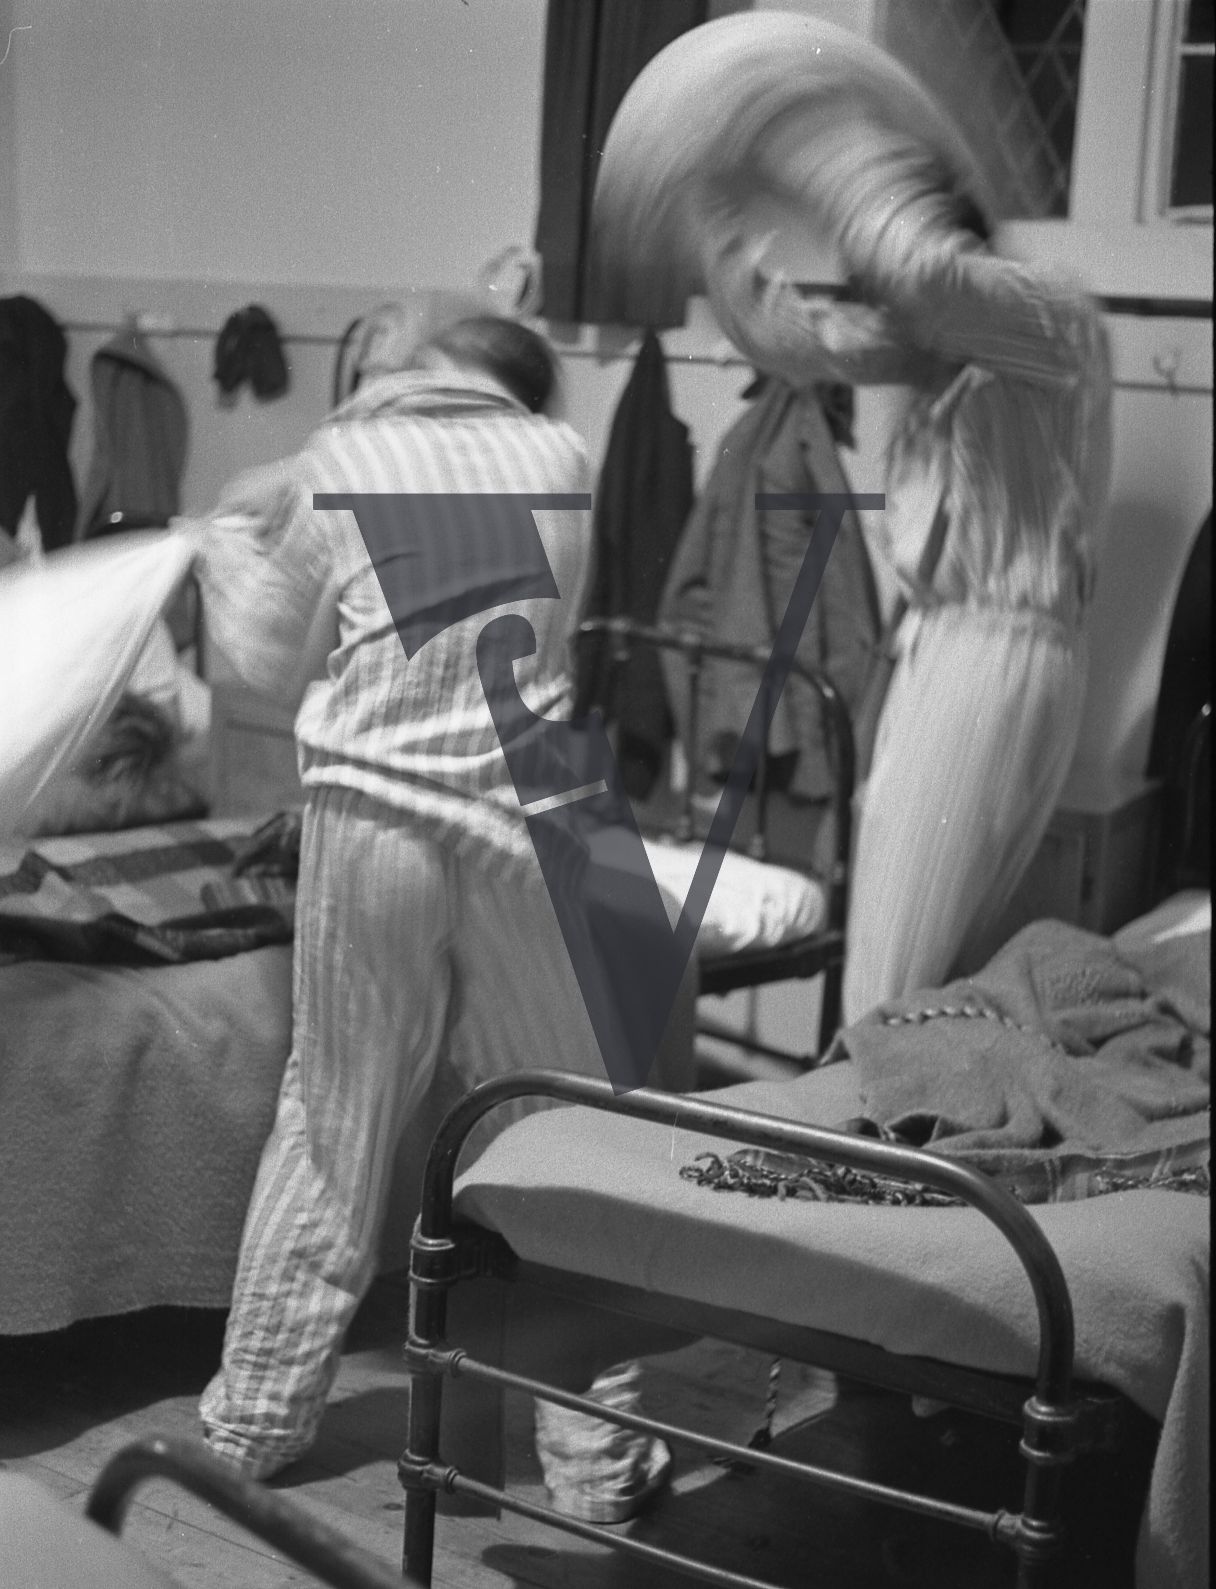 Public School, West Sussex, pillow fight, abstract, striped pyjamas.